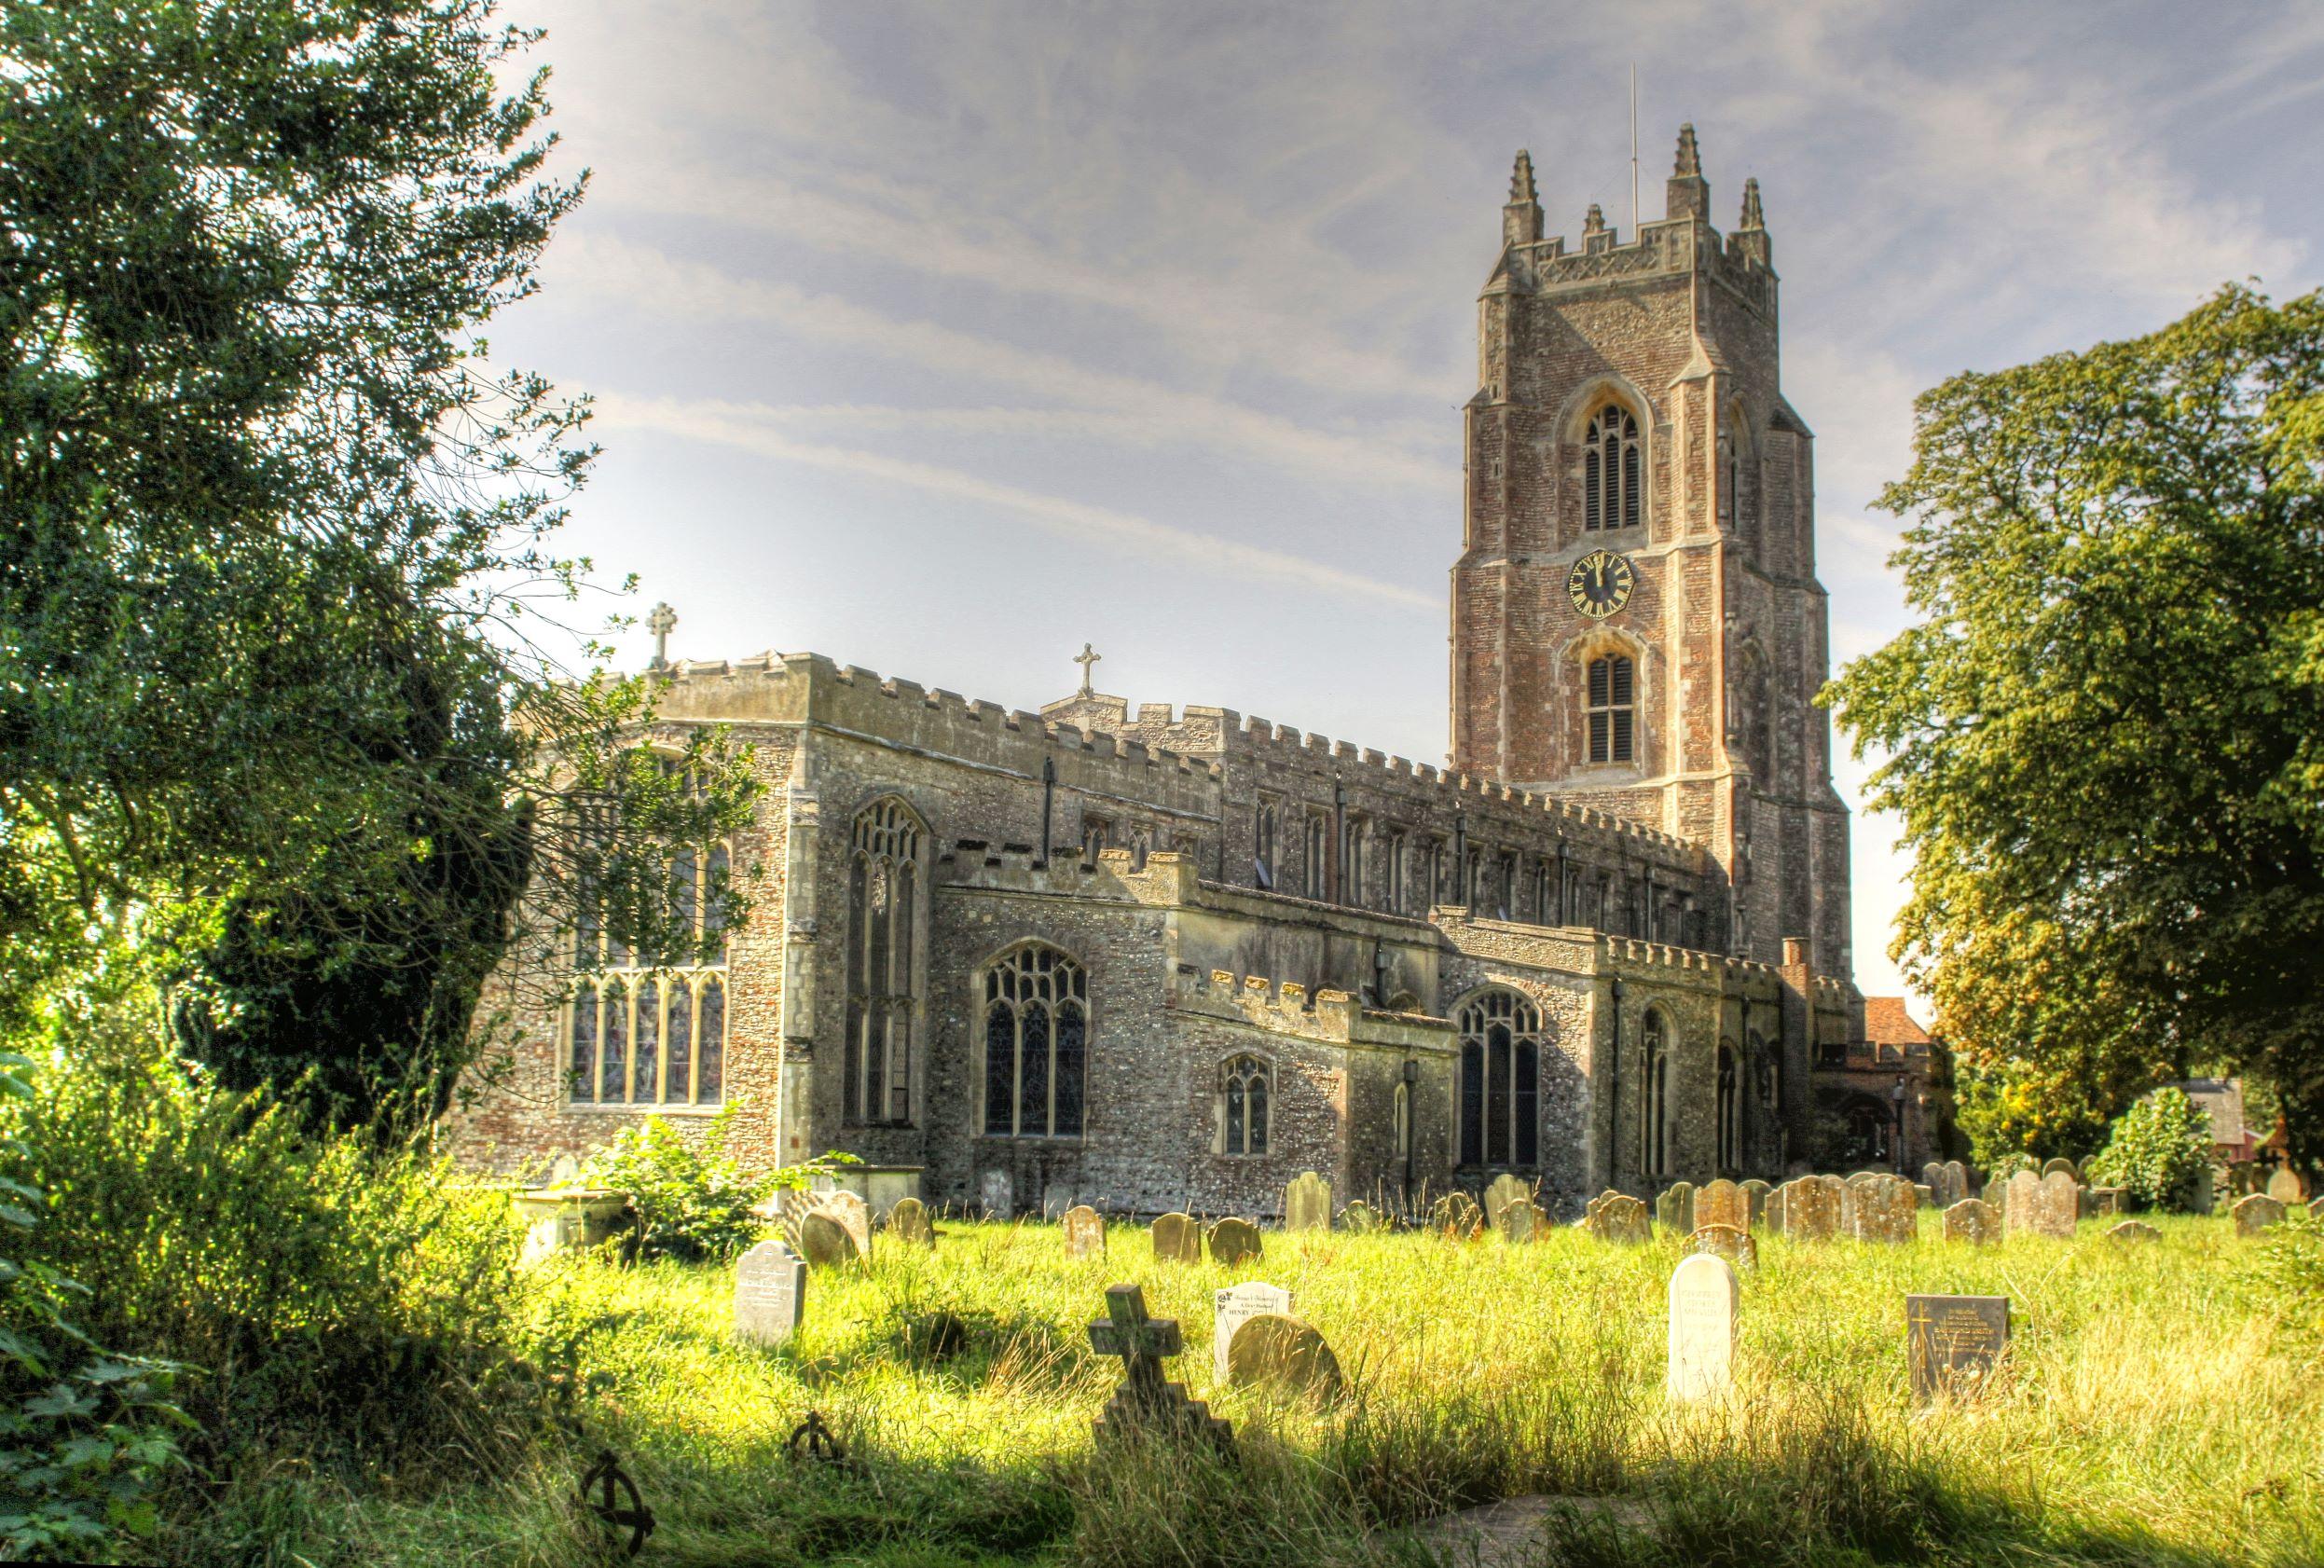 The church of St Mary’s, Stoke-by-Nayland in Suffolk, on a sunny day.